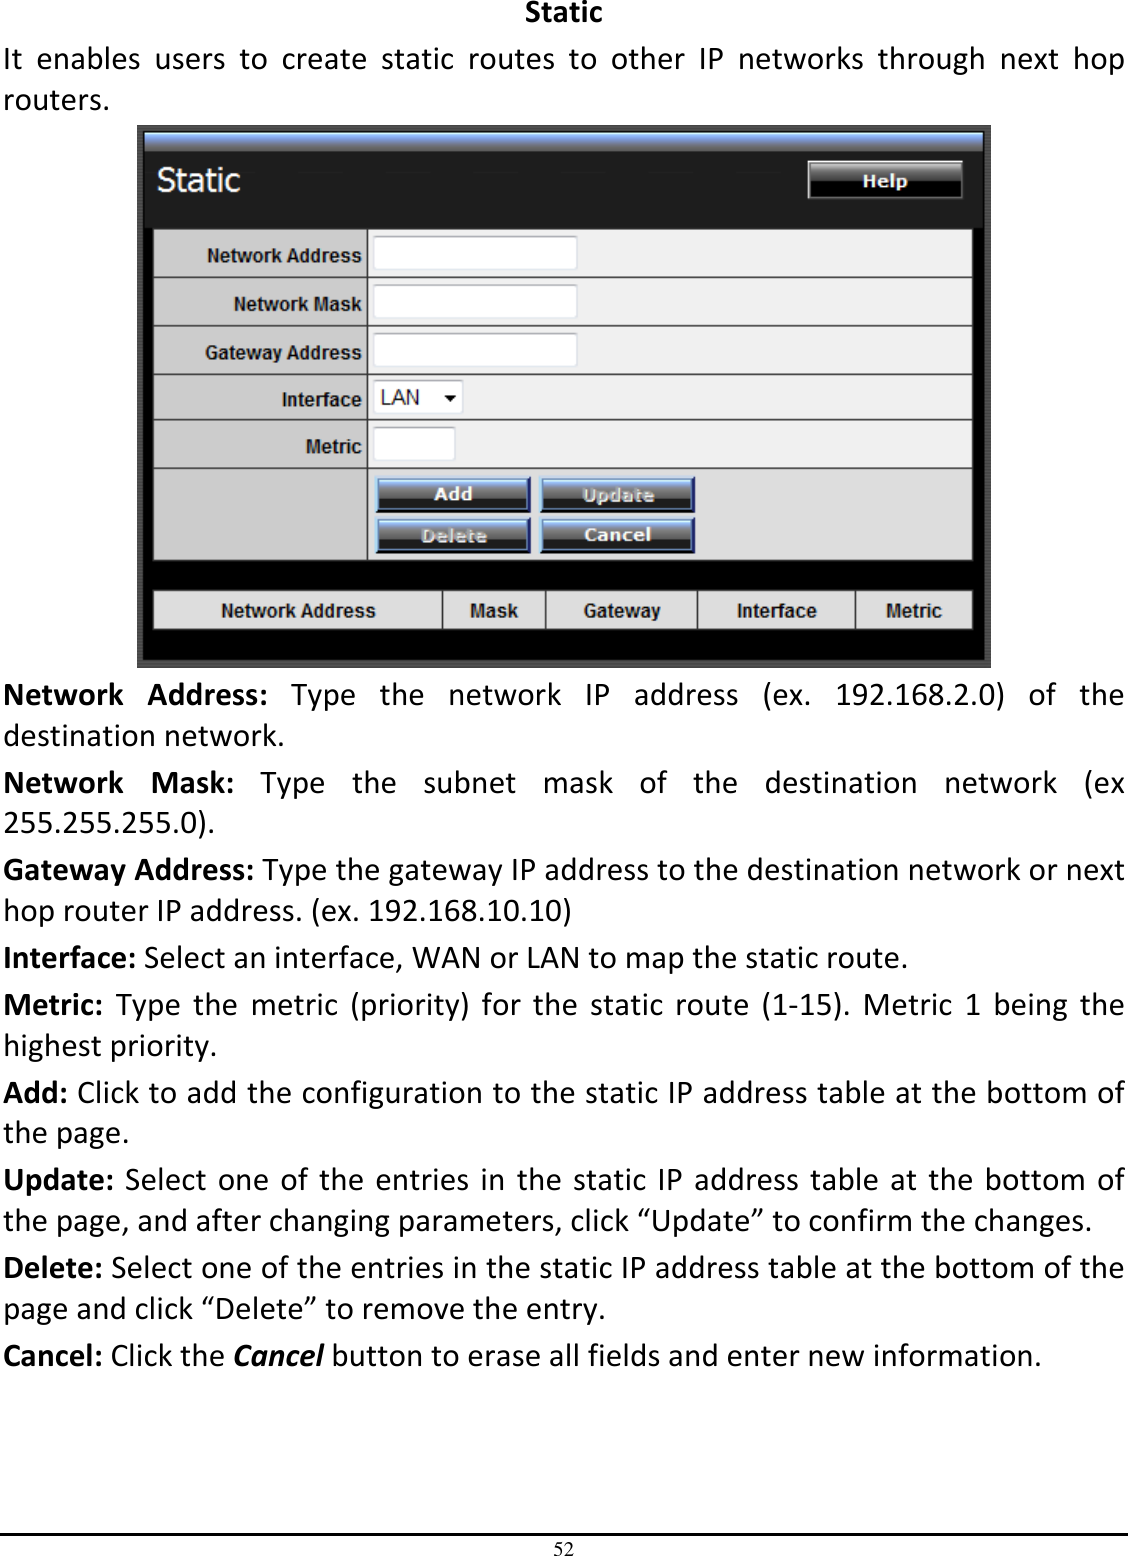 52 Static It  enables  users  to  create  static  routes  to  other  IP  networks  through  next  hop routers.  Network  Address:  Type  the  network  IP  address  (ex.  192.168.2.0)  of  the destination network. Network  Mask:  Type  the  subnet  mask  of  the  destination  network  (ex 255.255.255.0).  Gateway Address: Type the gateway IP address to the destination network or next hop router IP address. (ex. 192.168.10.10) Interface: Select an interface, WAN or LAN to map the static route.  Metric:  Type  the  metric  (priority)  for the  static  route  (1-15).  Metric  1  being the highest priority. Add: Click to add the configuration to the static IP address table at the bottom of the page. Update: Select one of the entries in the static IP address table at the bottom of the page, and after changing parameters, click “Update” to confirm the changes. Delete: Select one of the entries in the static IP address table at the bottom of the page and click “Delete” to remove the entry. Cancel: Click the Cancel button to erase all fields and enter new information. 